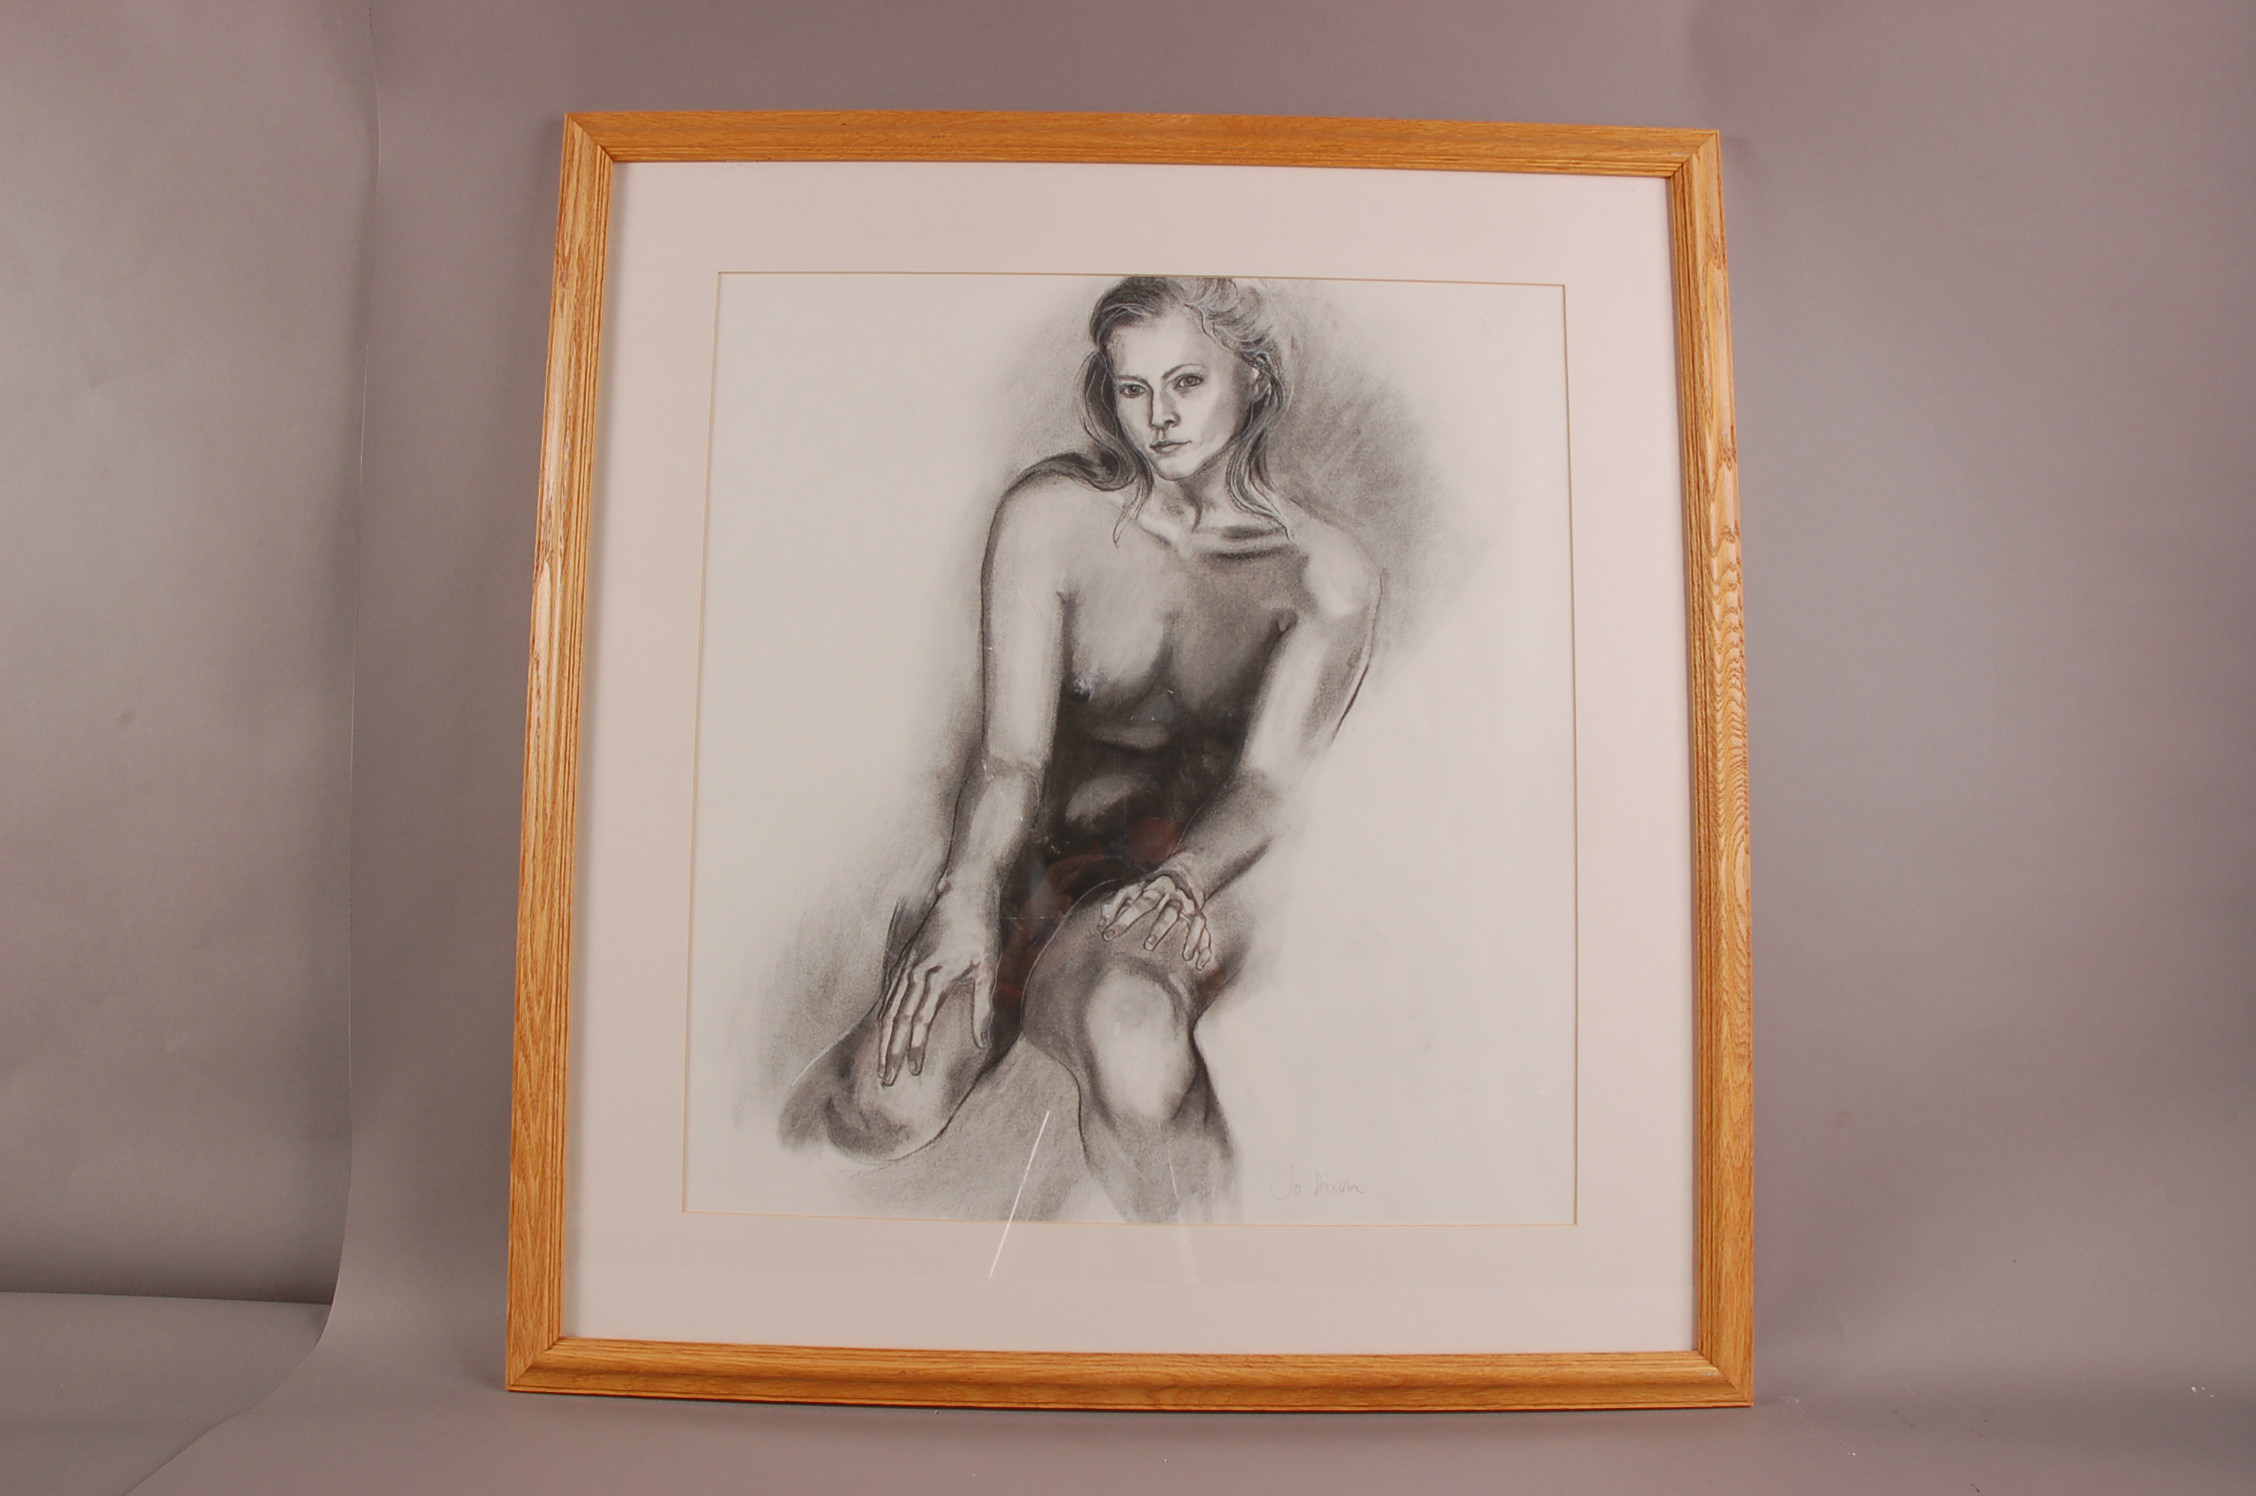 Jo Dixon (20th century), 58cm by 53cm, charcoal on paper, Portrait of a Young Nude Lady, signed,